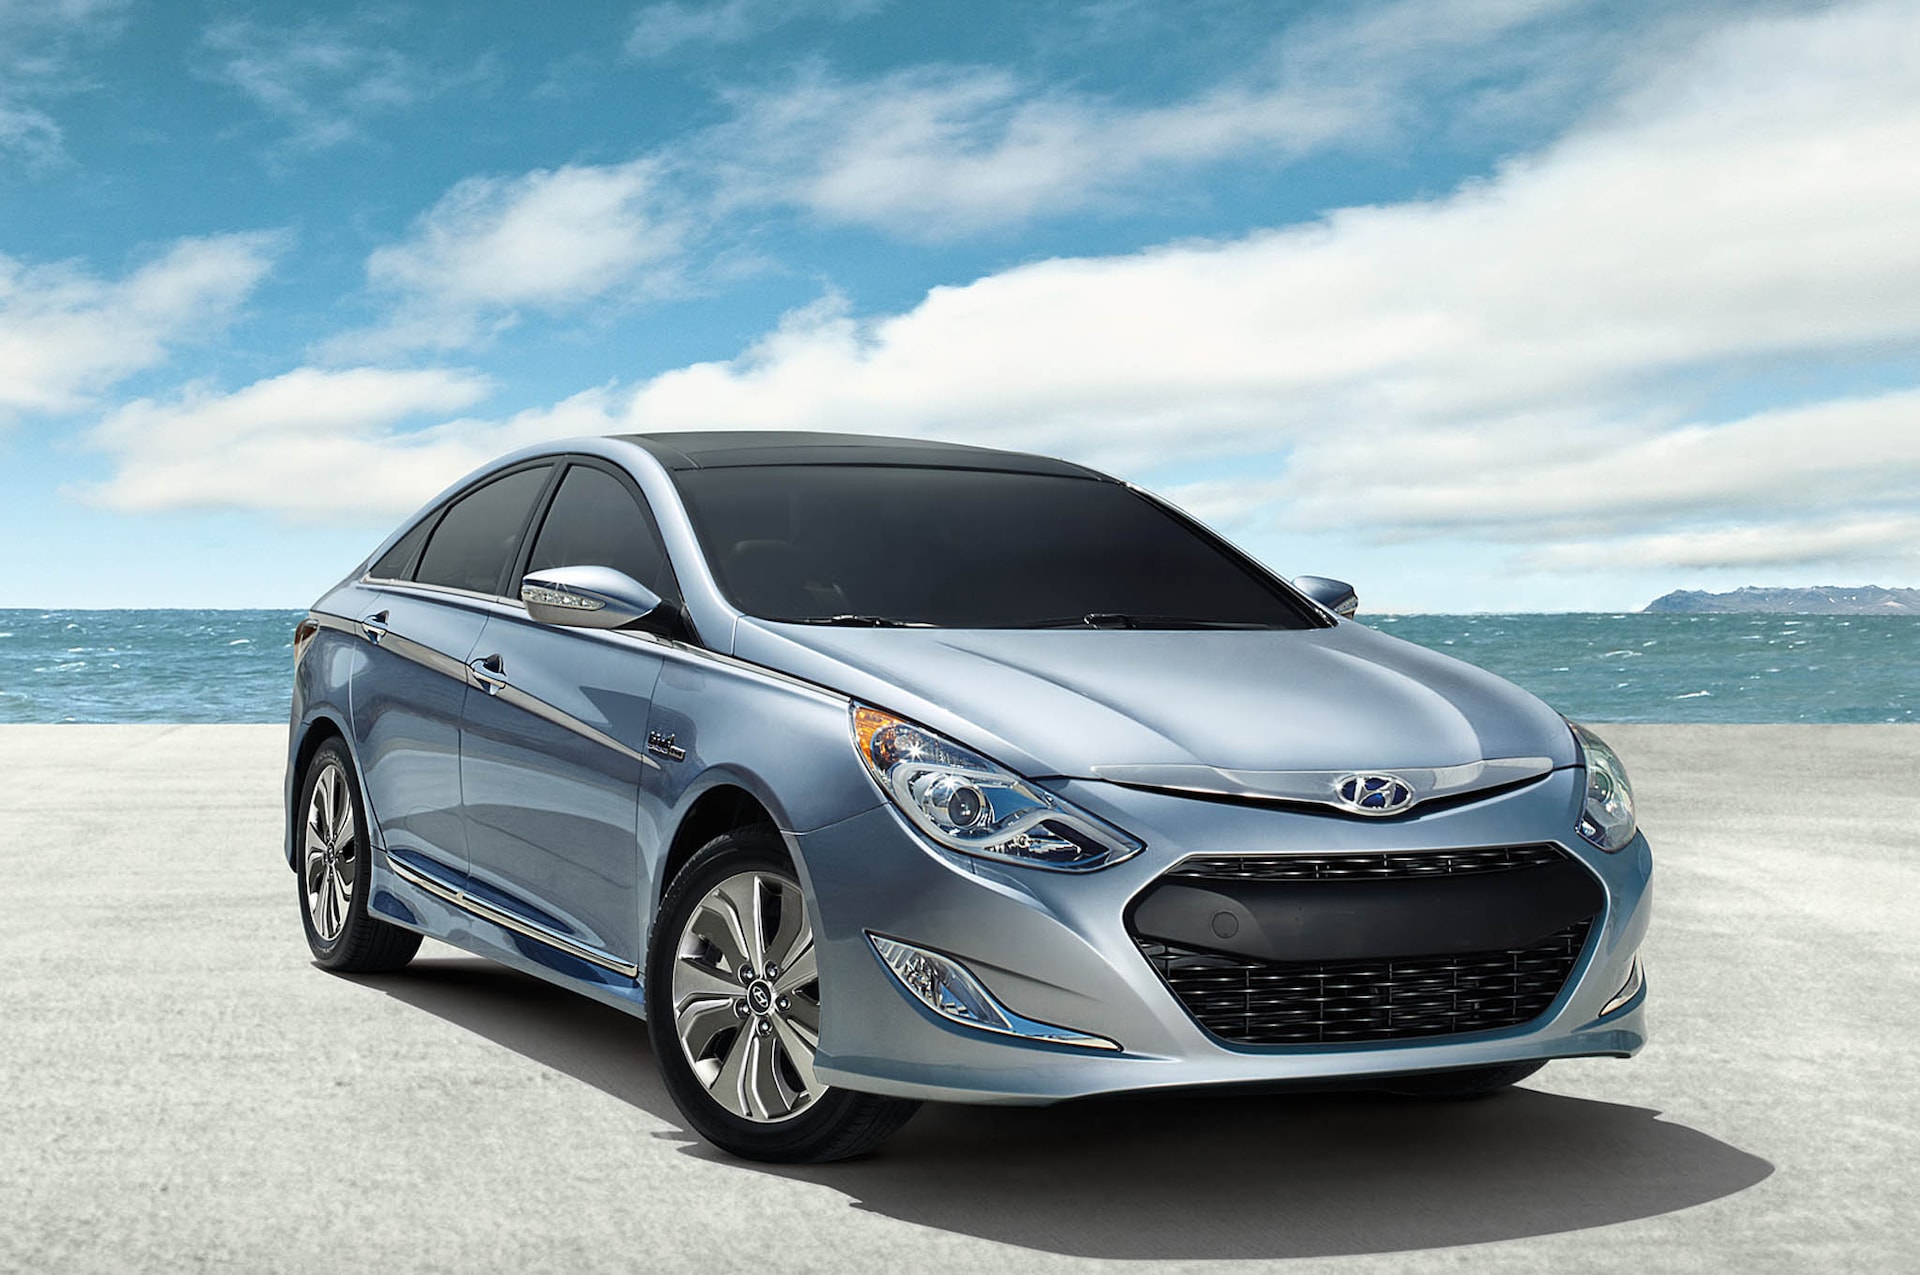 Outgoing Hyundai Sonata Hybrid Continues For 2015 Model Year